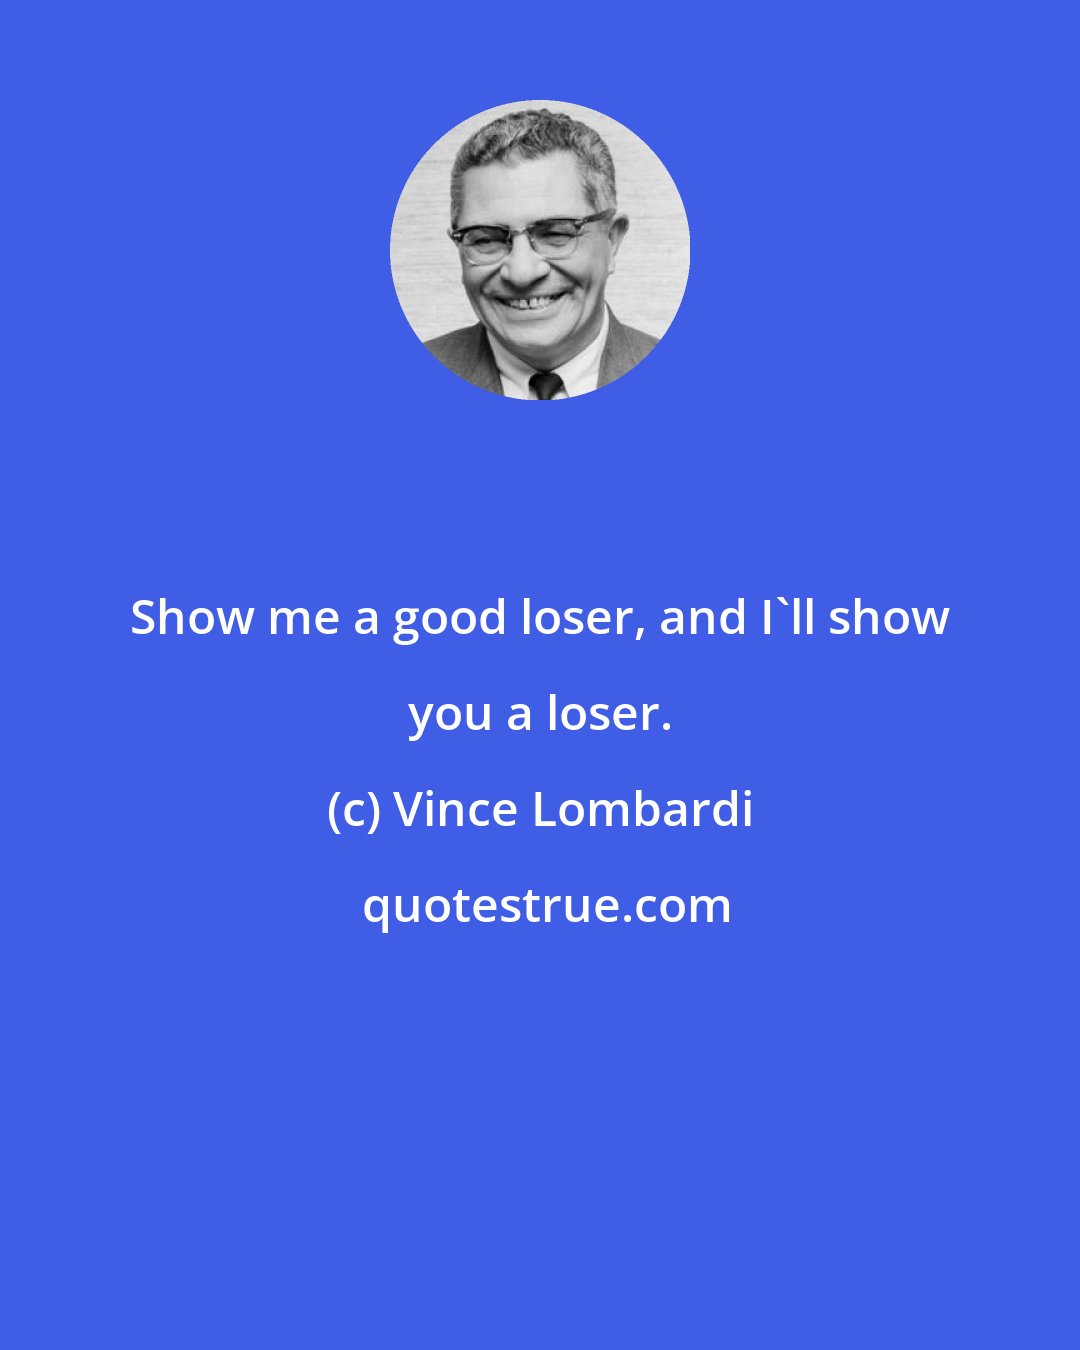 Vince Lombardi: Show me a good loser, and I'll show you a loser.